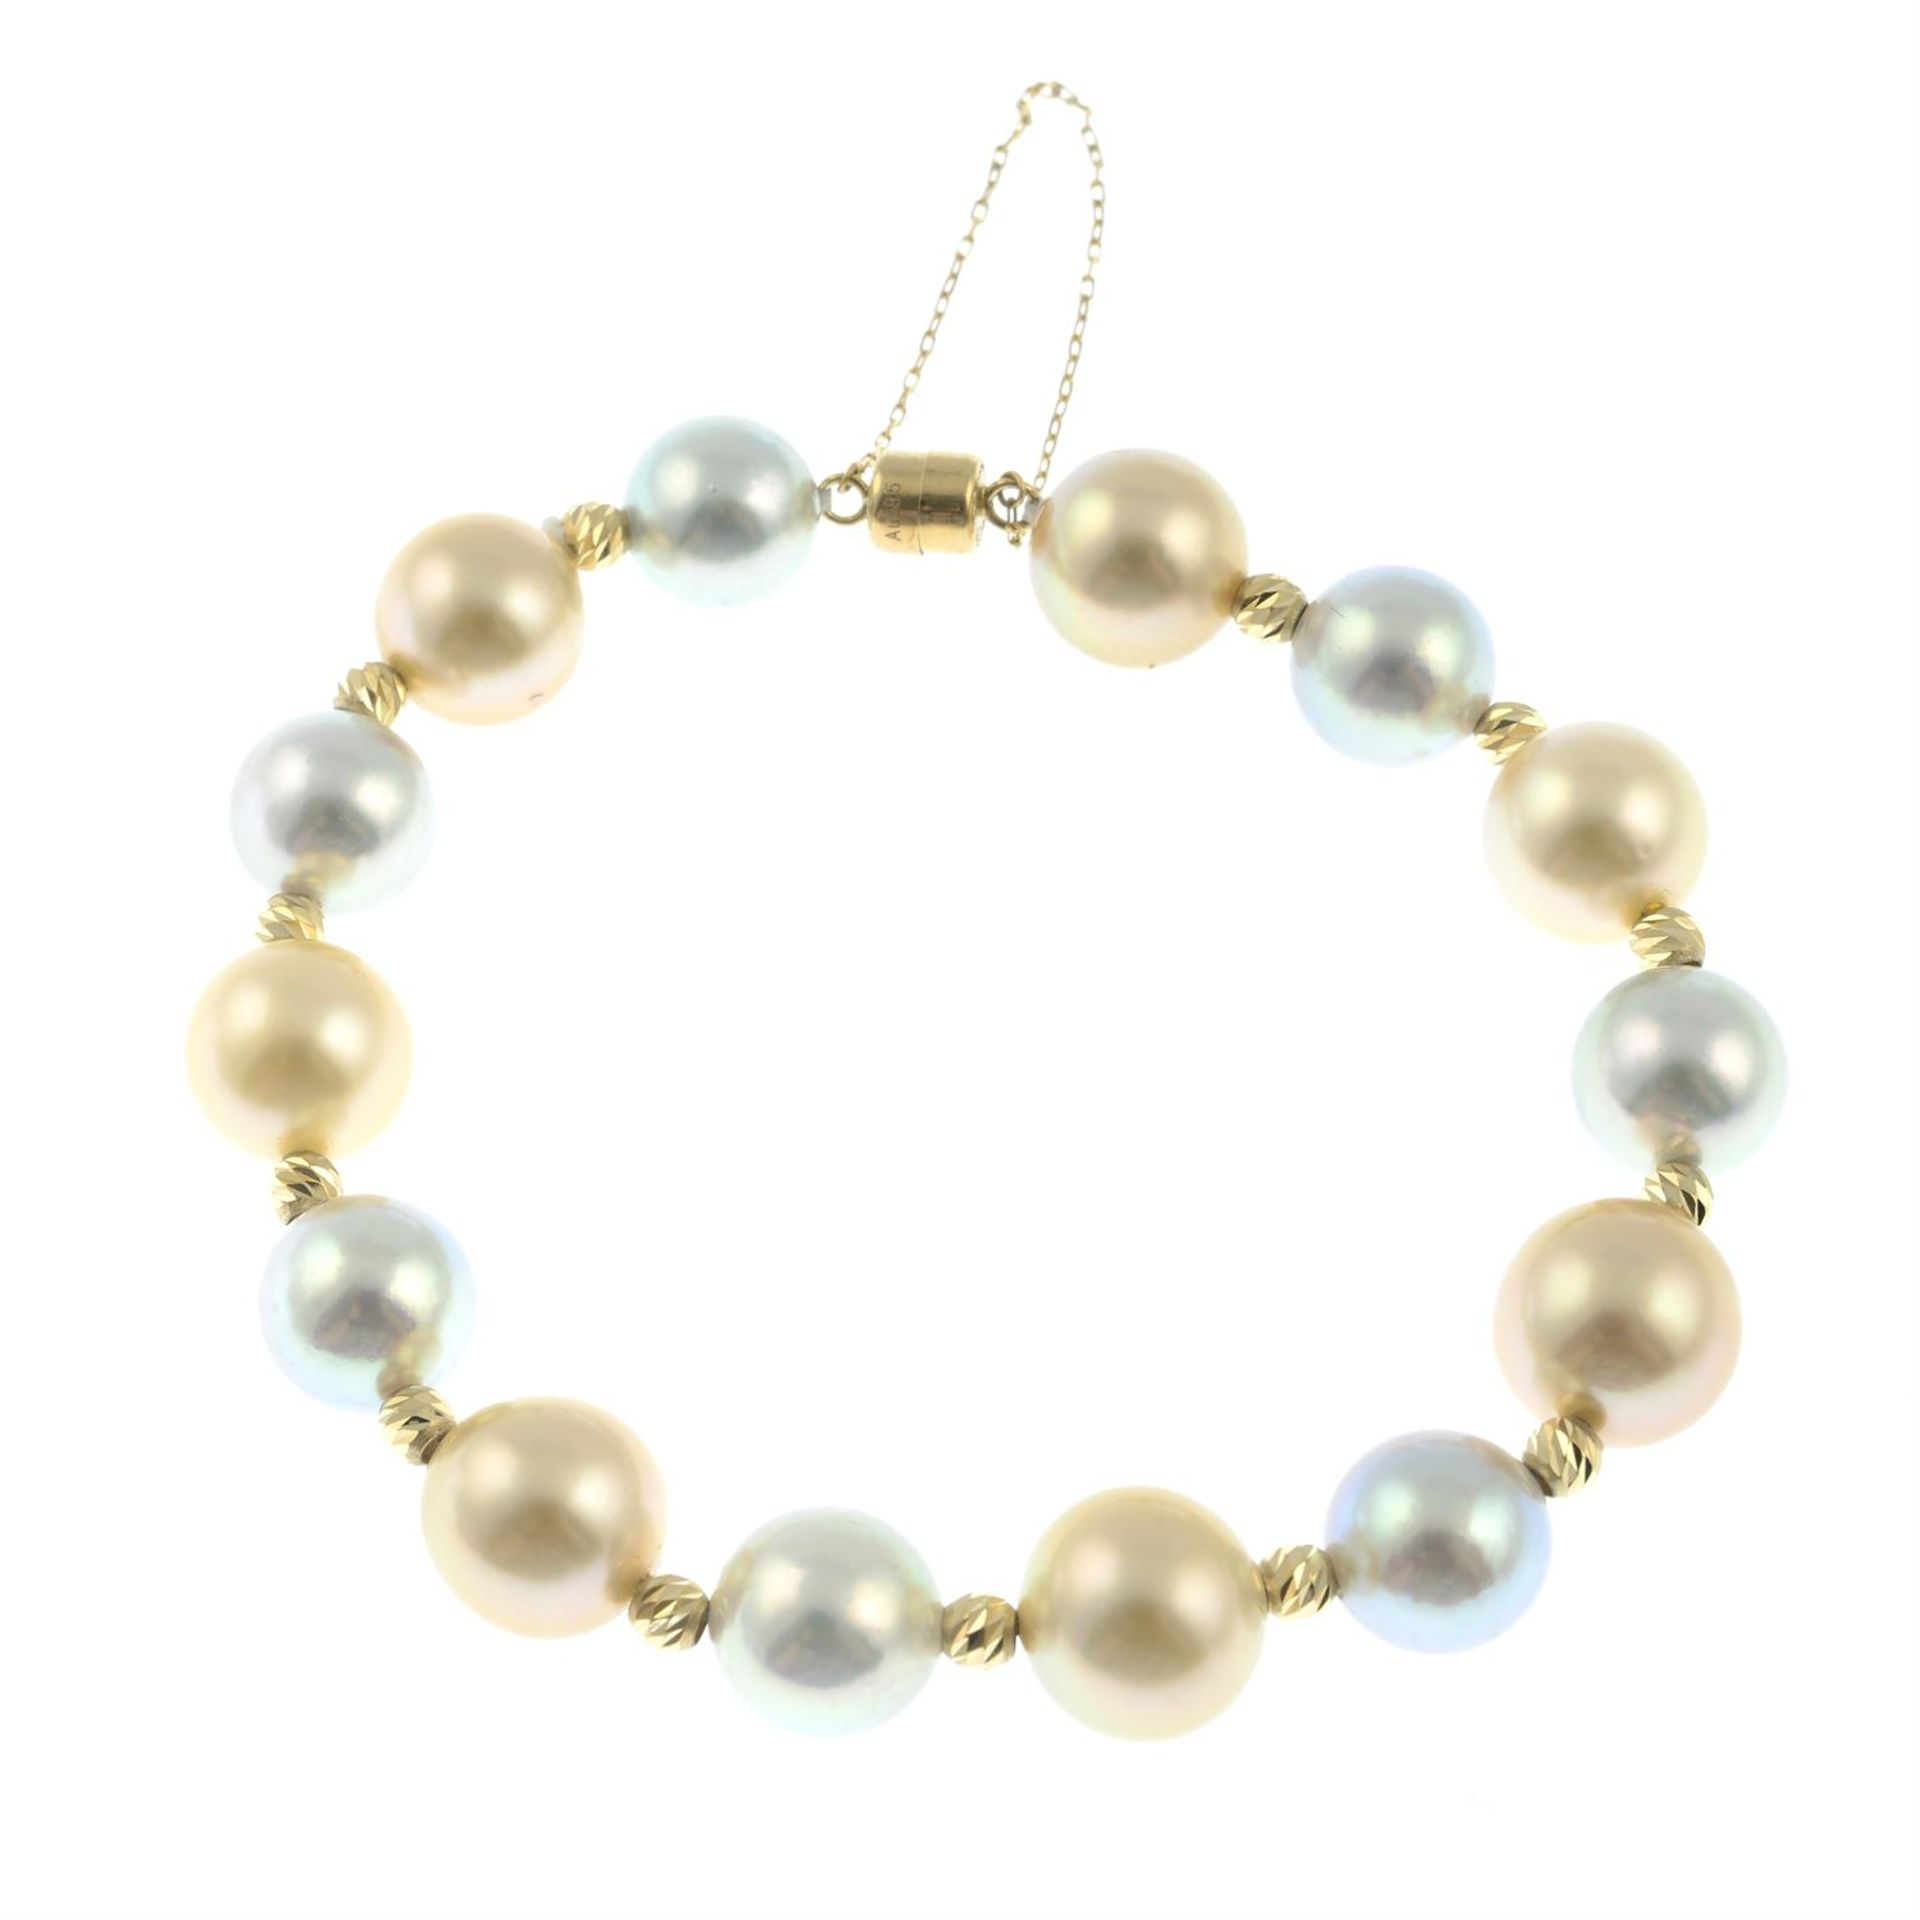 A vari-hue cultured pearl bracelet, with textured spacers.